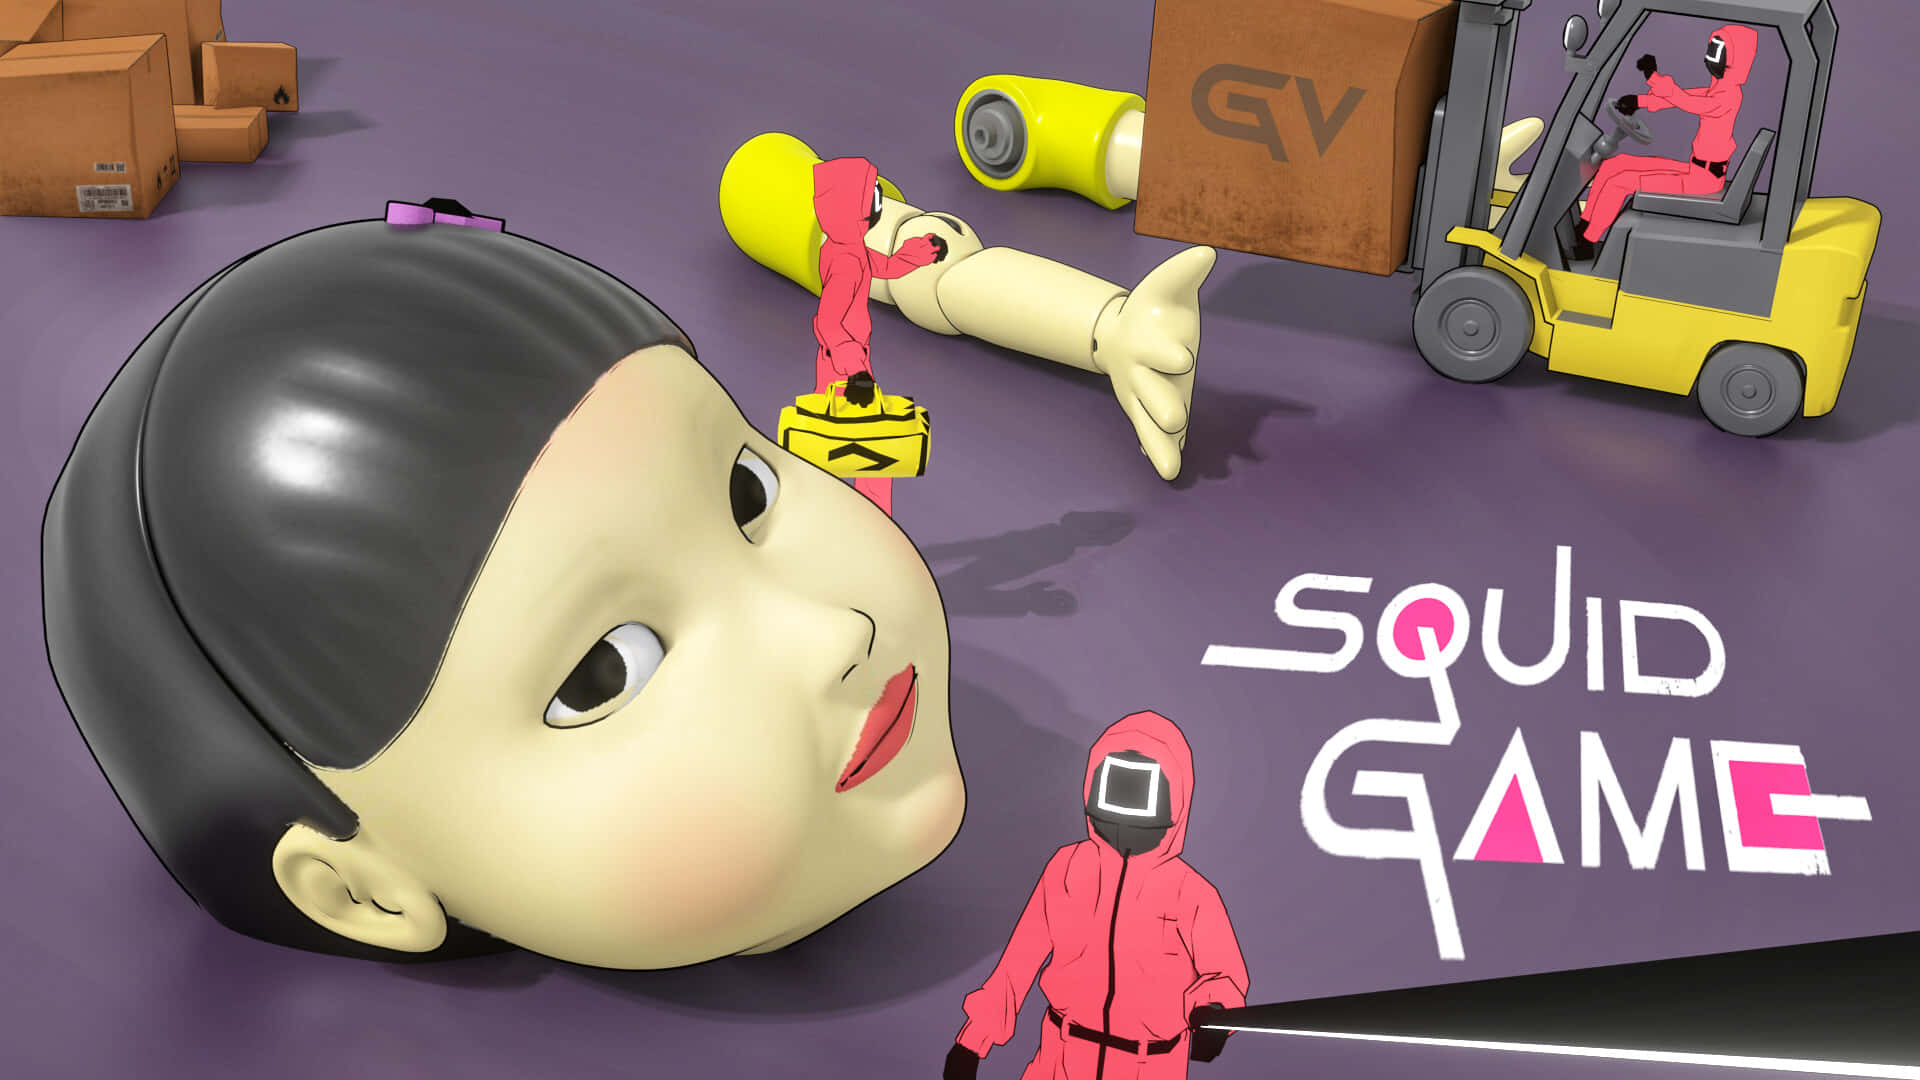 Unleash your full gaming potential with Squid Game!